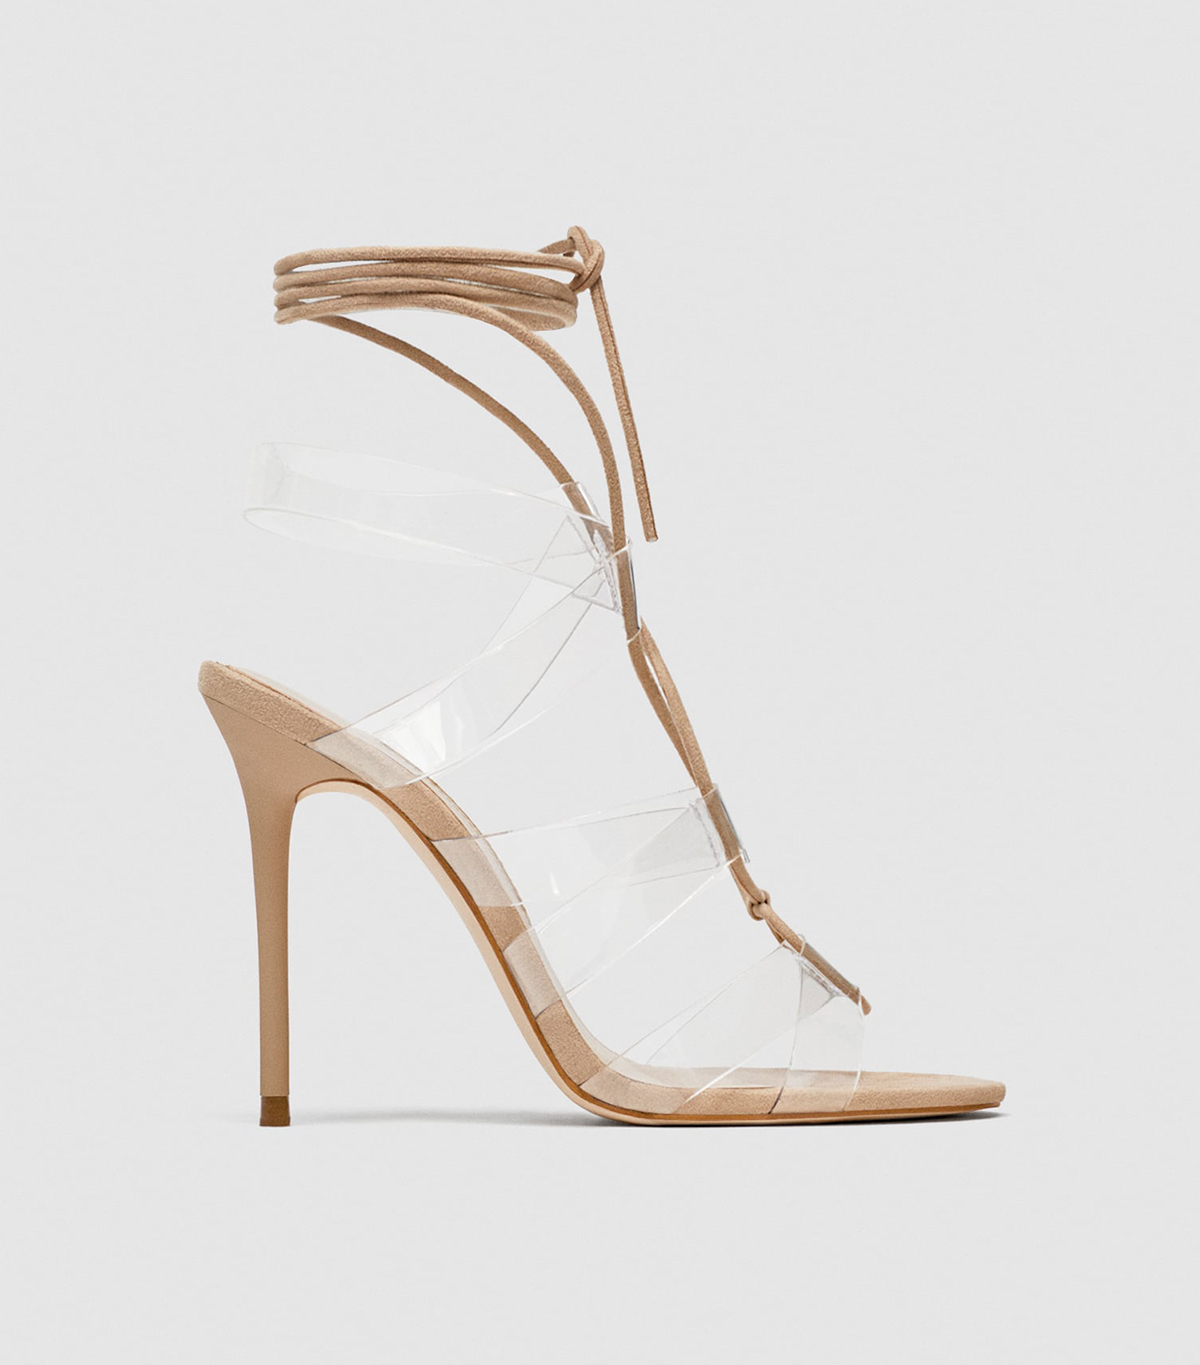 Zara's New Naked Shoes Will Give You 